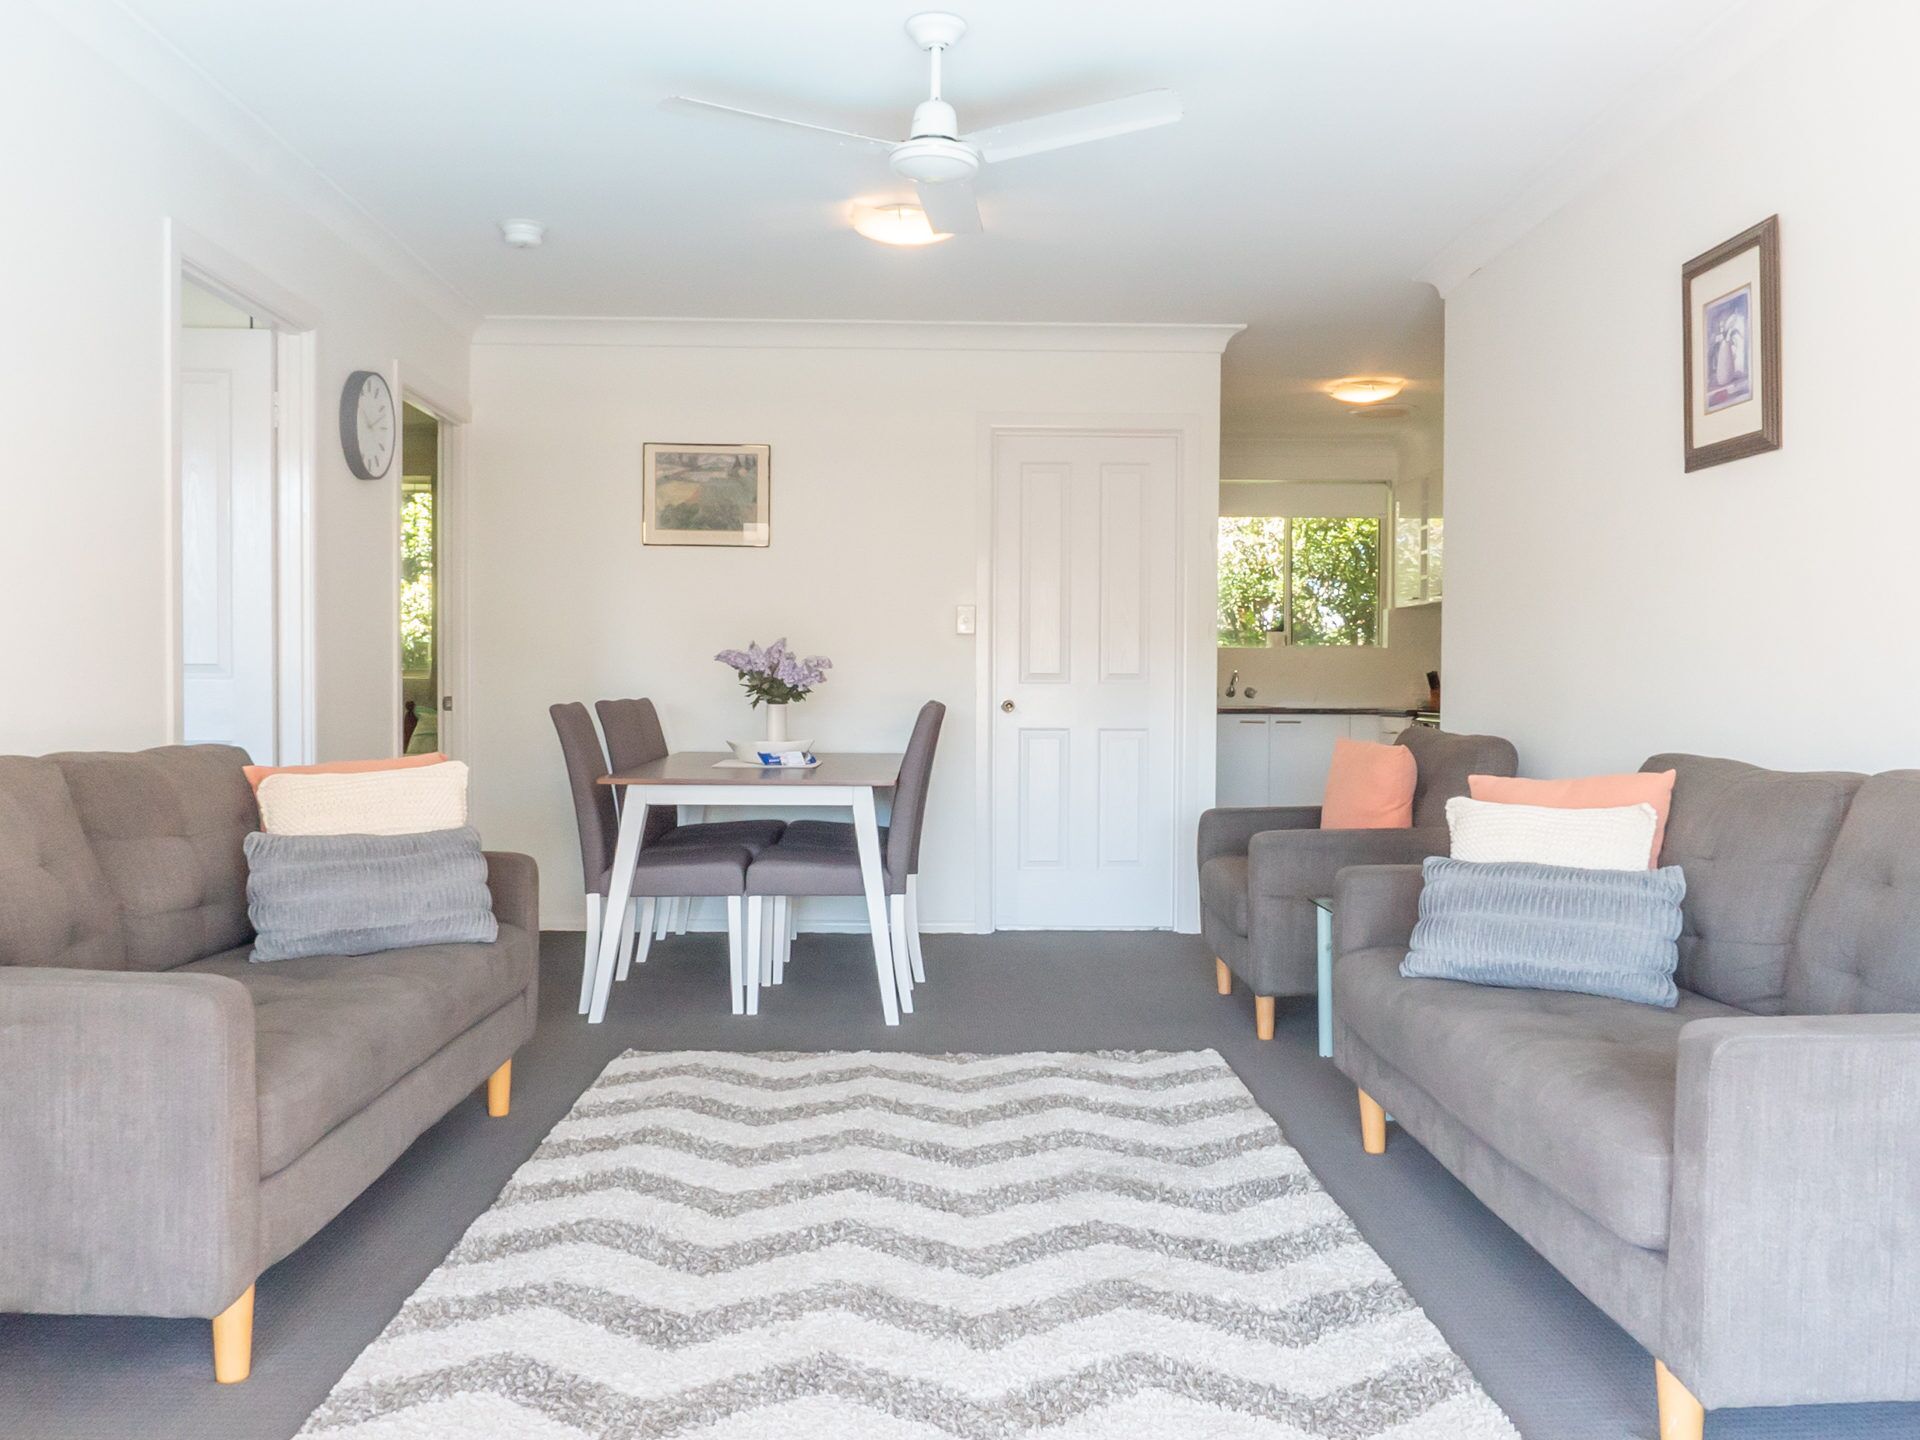 A 2 Minute Walk to the Main Street of Sawtell! Linen Included